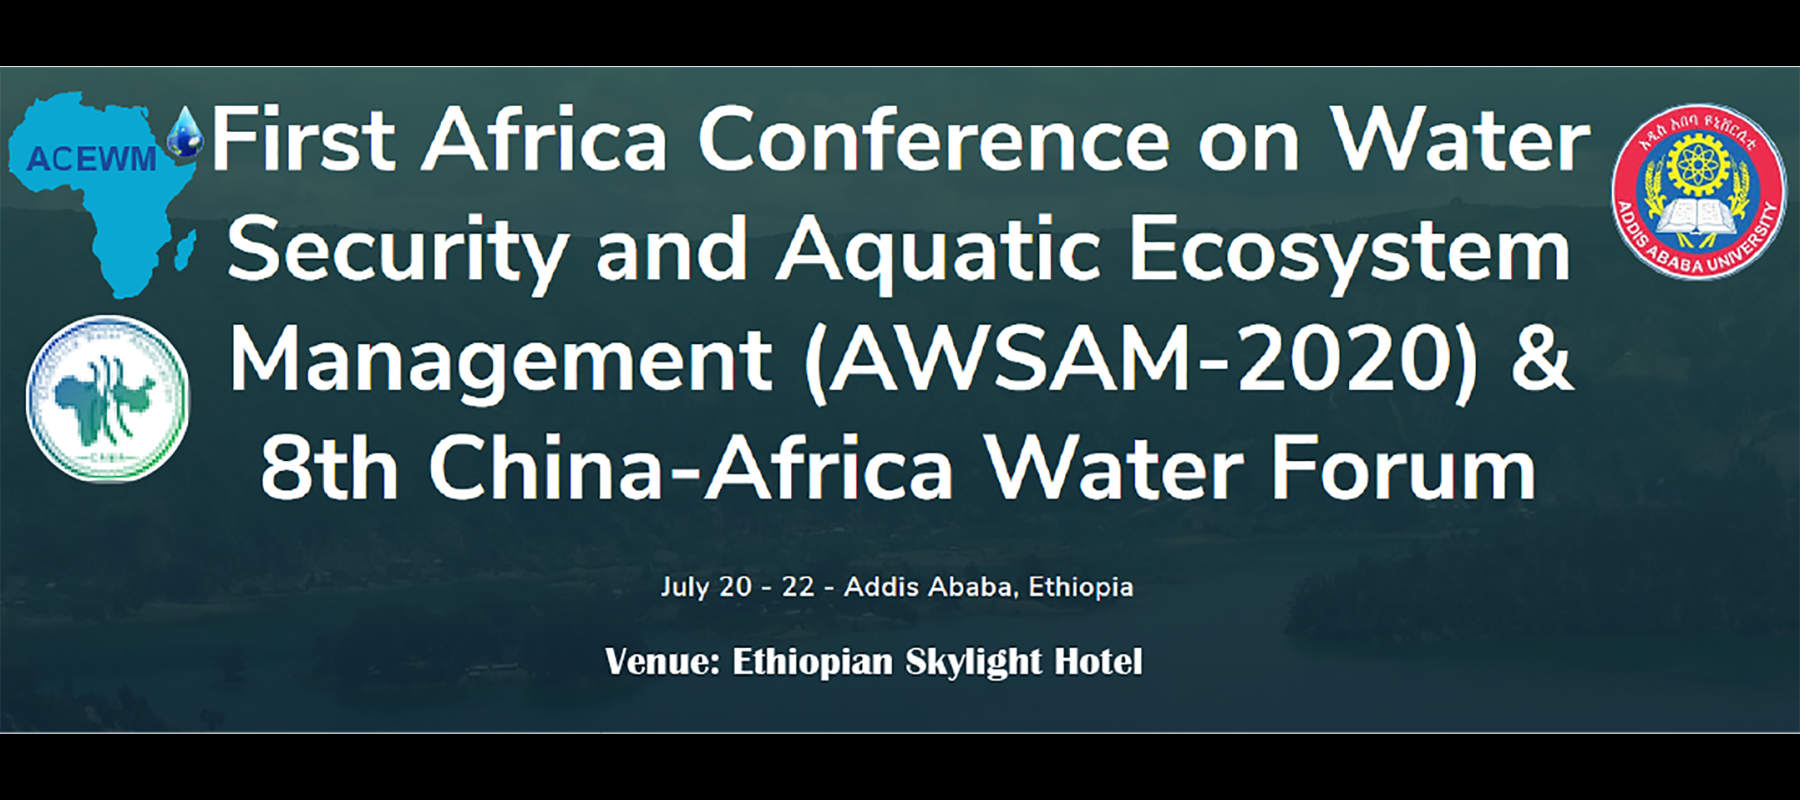 First Africa Conference on Water Security and Aquatic Ecosystem Management (AWSAM-2020) & 8th China-Africa Water Forum